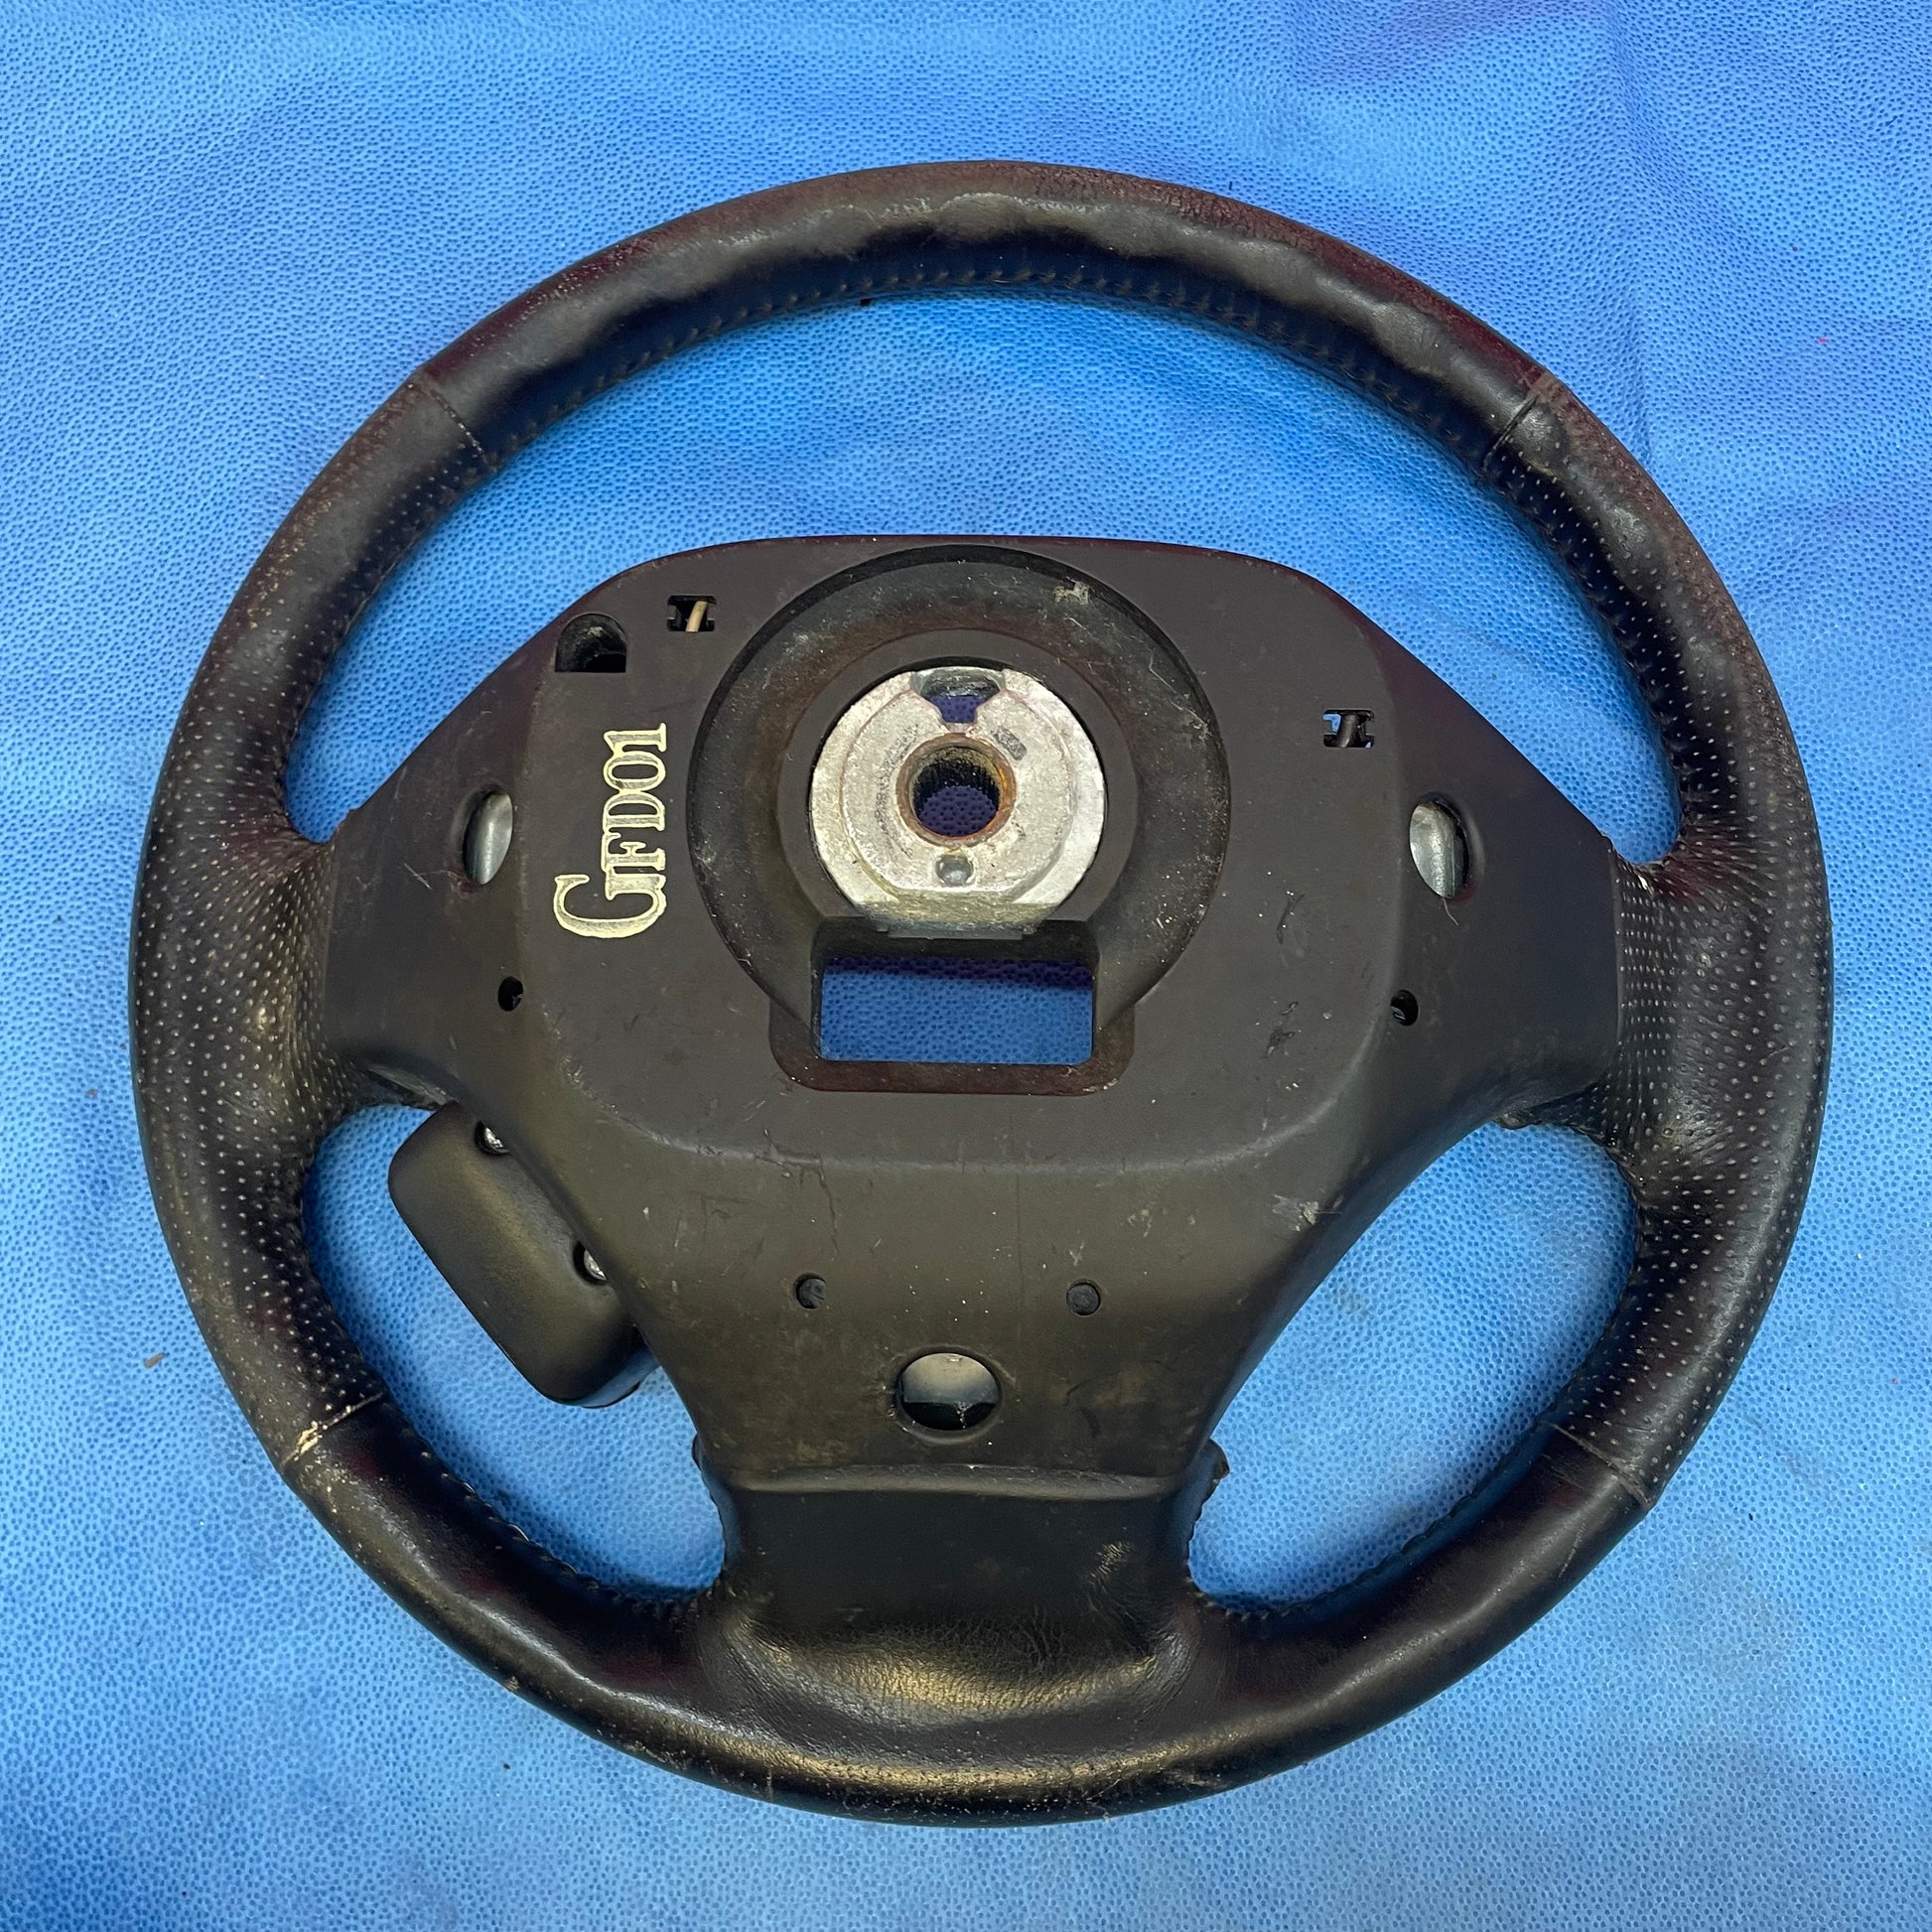 LHD OEM Steering Wheel Complete w/ Cruise Control Buttons  Mazda Rx7 FD3S FD S4B3ABSW - RX7Parts